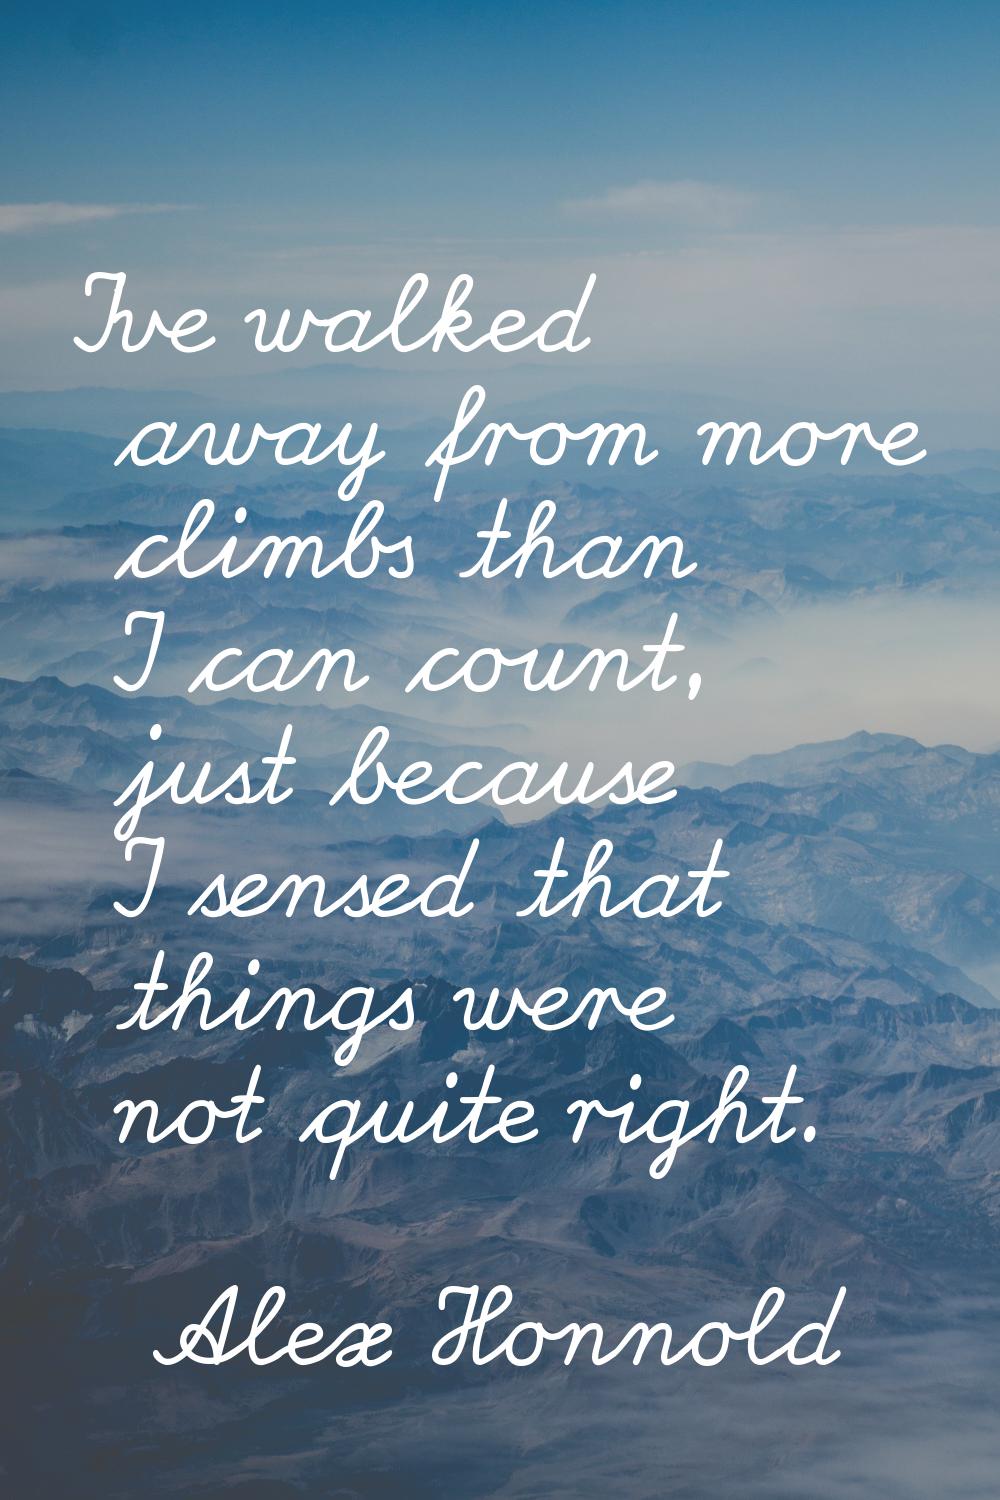 I've walked away from more climbs than I can count, just because I sensed that things were not quit